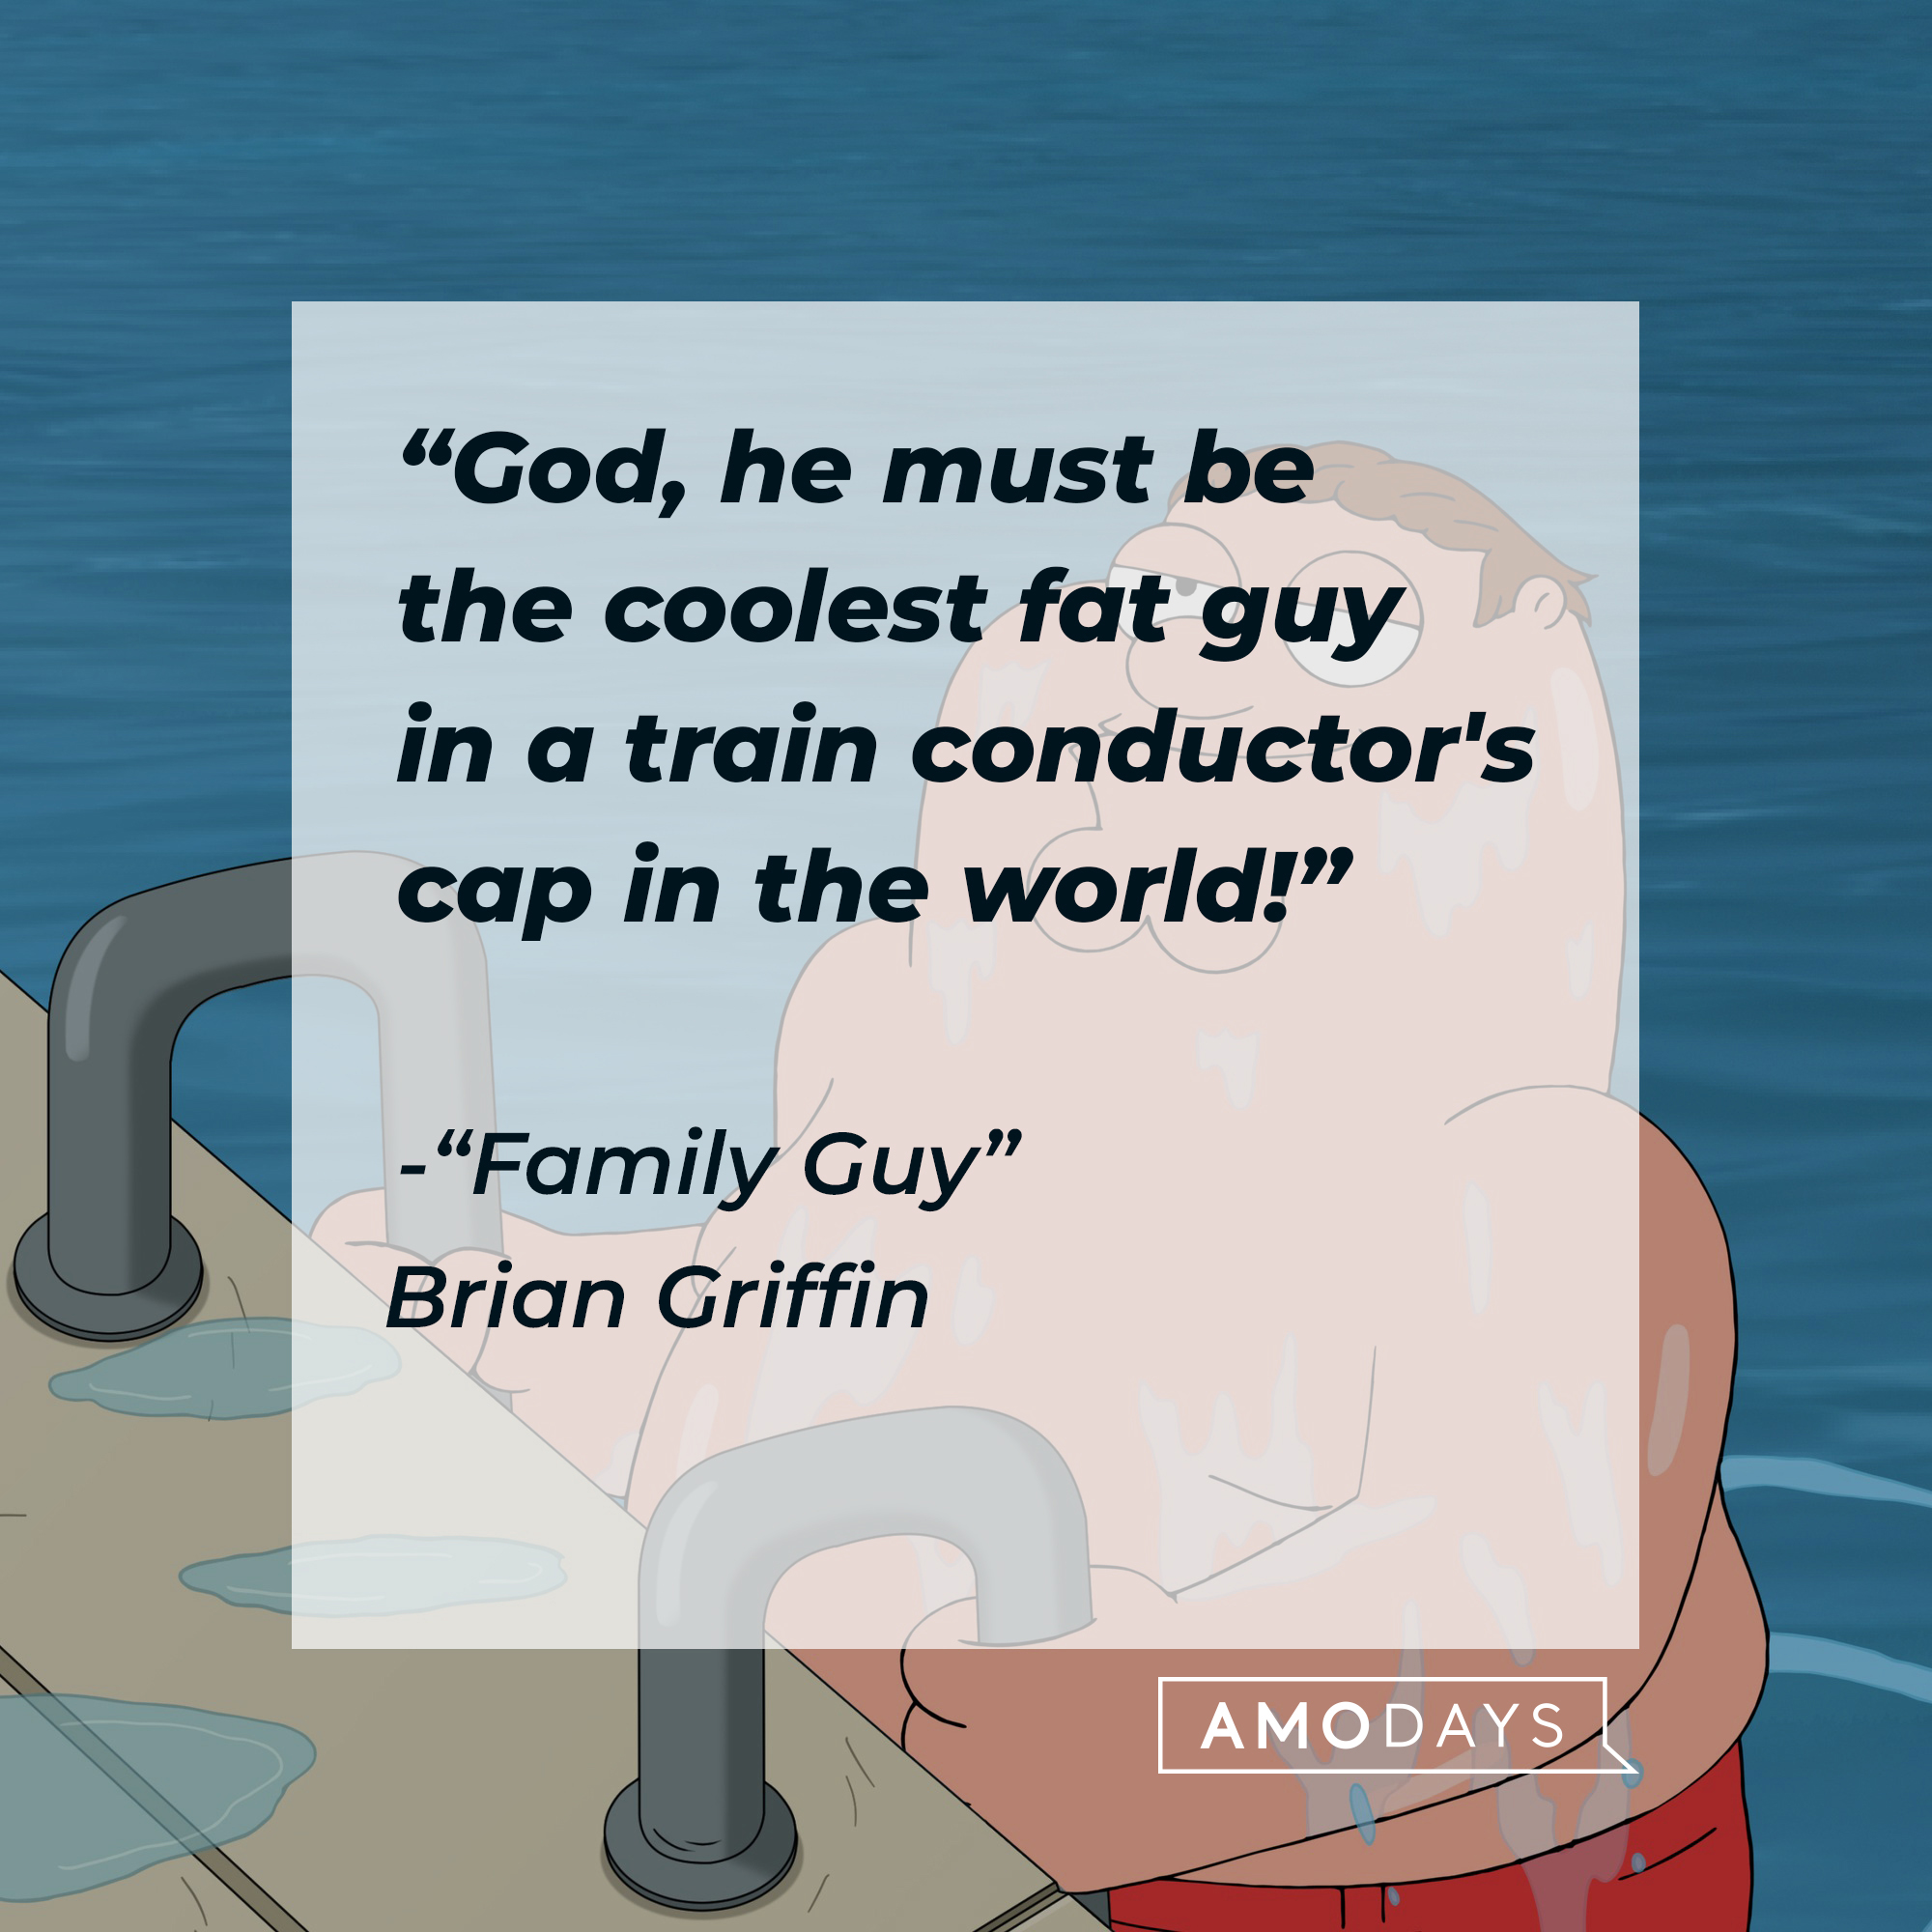 Peter Griffin with Brian Griffin's quote: “God, he must be the coolest fat guy in a train conductor's cap in the world!" | Source: Facebook.com/FamilyGuy